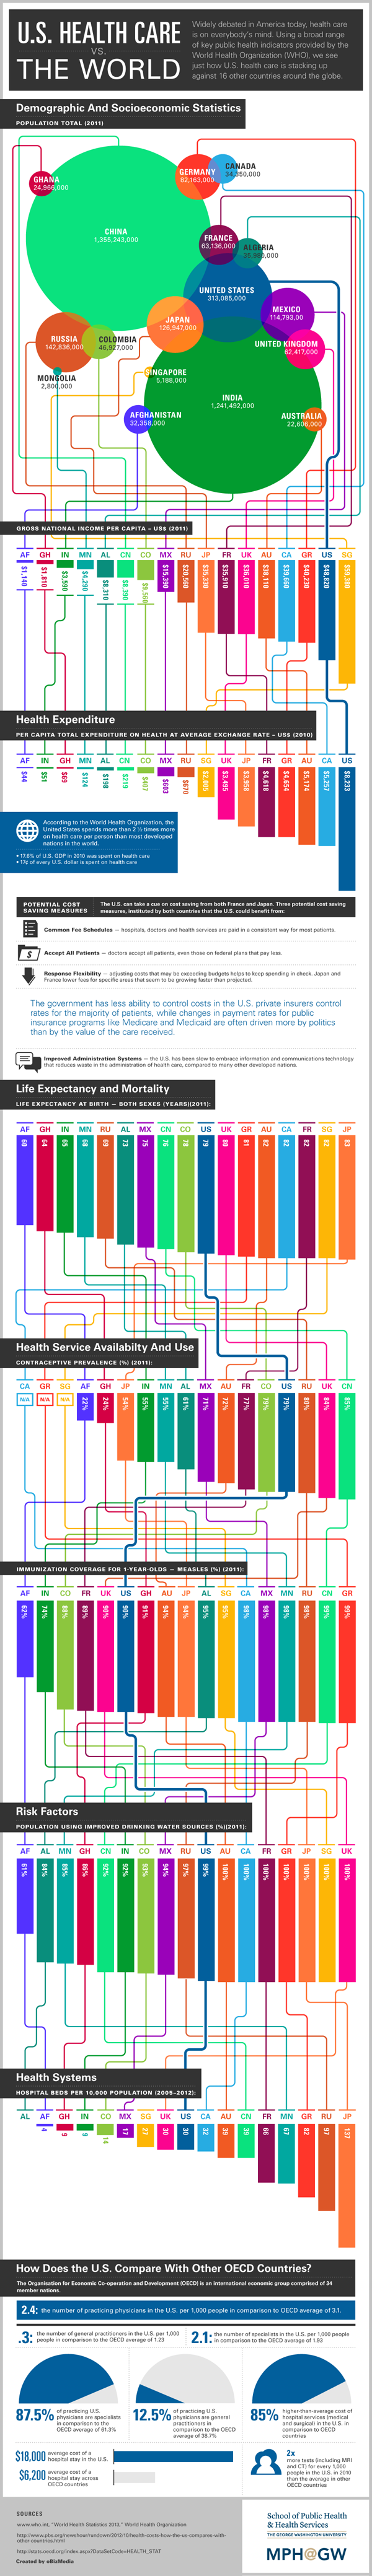 infographic of us healthcare compared to world